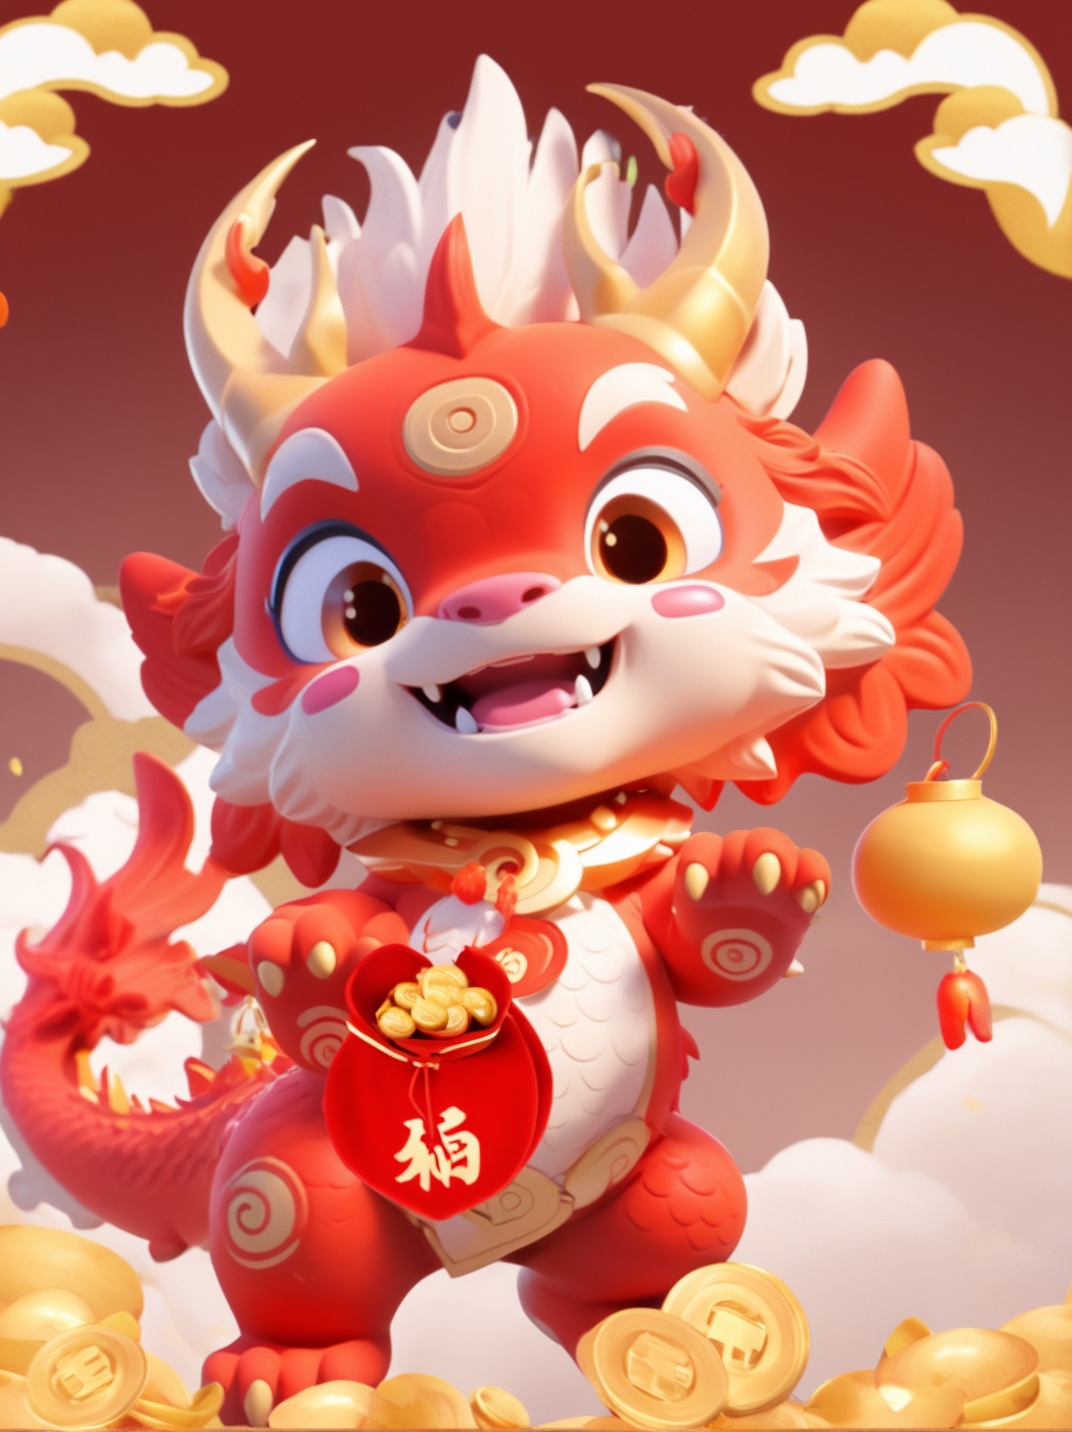 a vibrant and animated character that appears to be a fusion of a dragon and a lion. The creature has a red body with white and gold accents, large, expressive eyes, and a pair of golden horns. It's adorned with a golden emblem on its forehead and holds a red bag filled with golden coins. The bag has a Chinese character on it, possibly representing 'fortune' or 'luck'. The character is surrounded by a soft, cloudy background, giving it a dreamy and ethereal feel<lora:LONG IP:1>